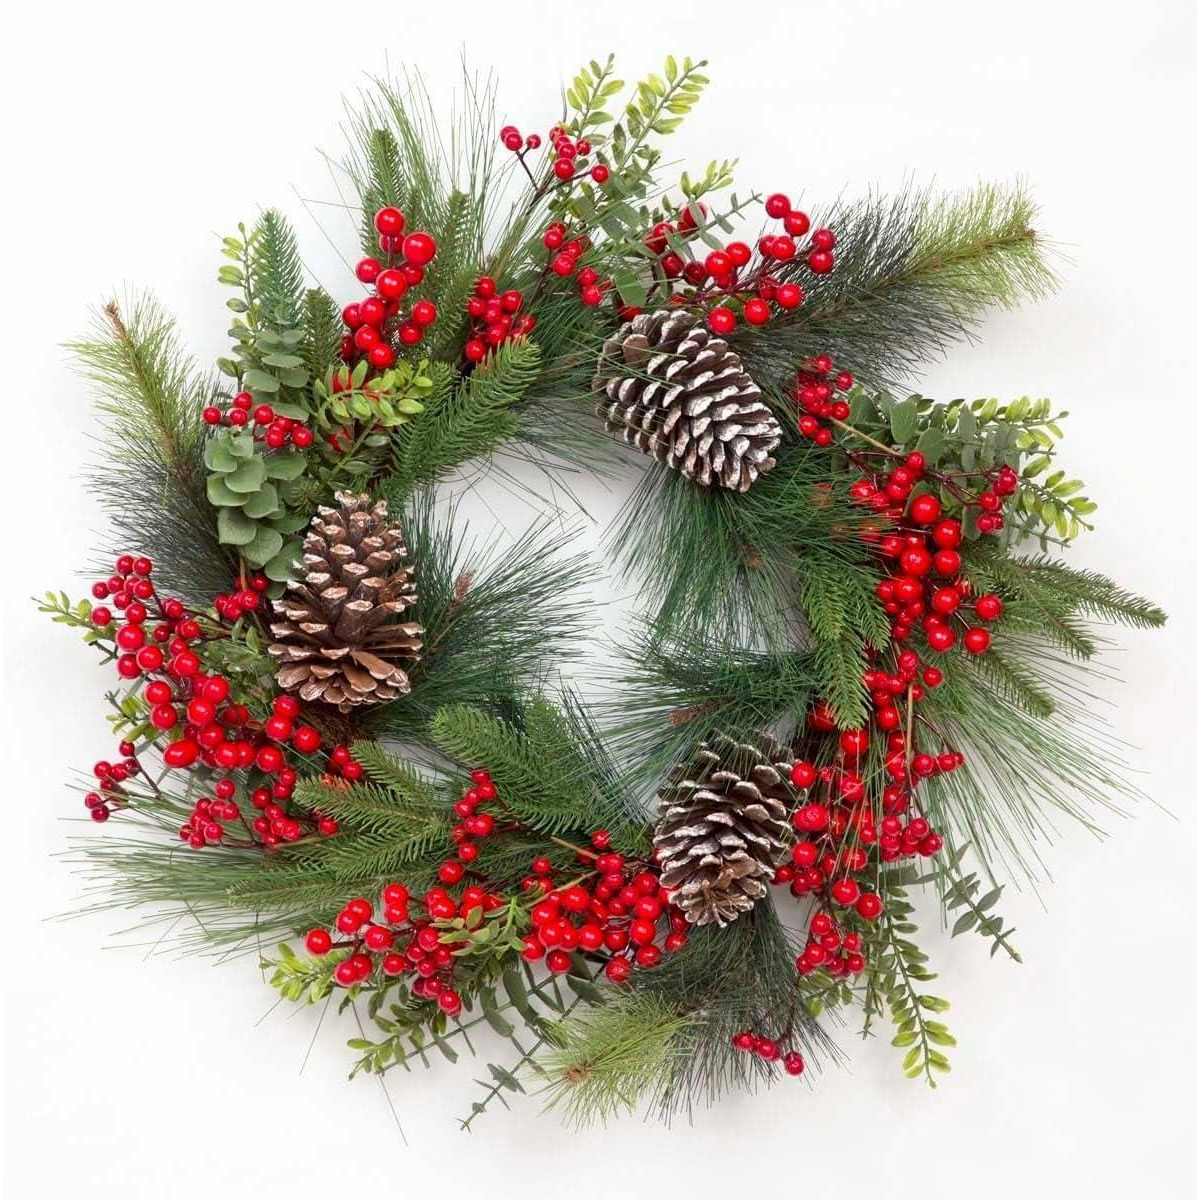 60cm B/O Pre lit Berry and Cone Wreath with 50 WW Leds - image 1